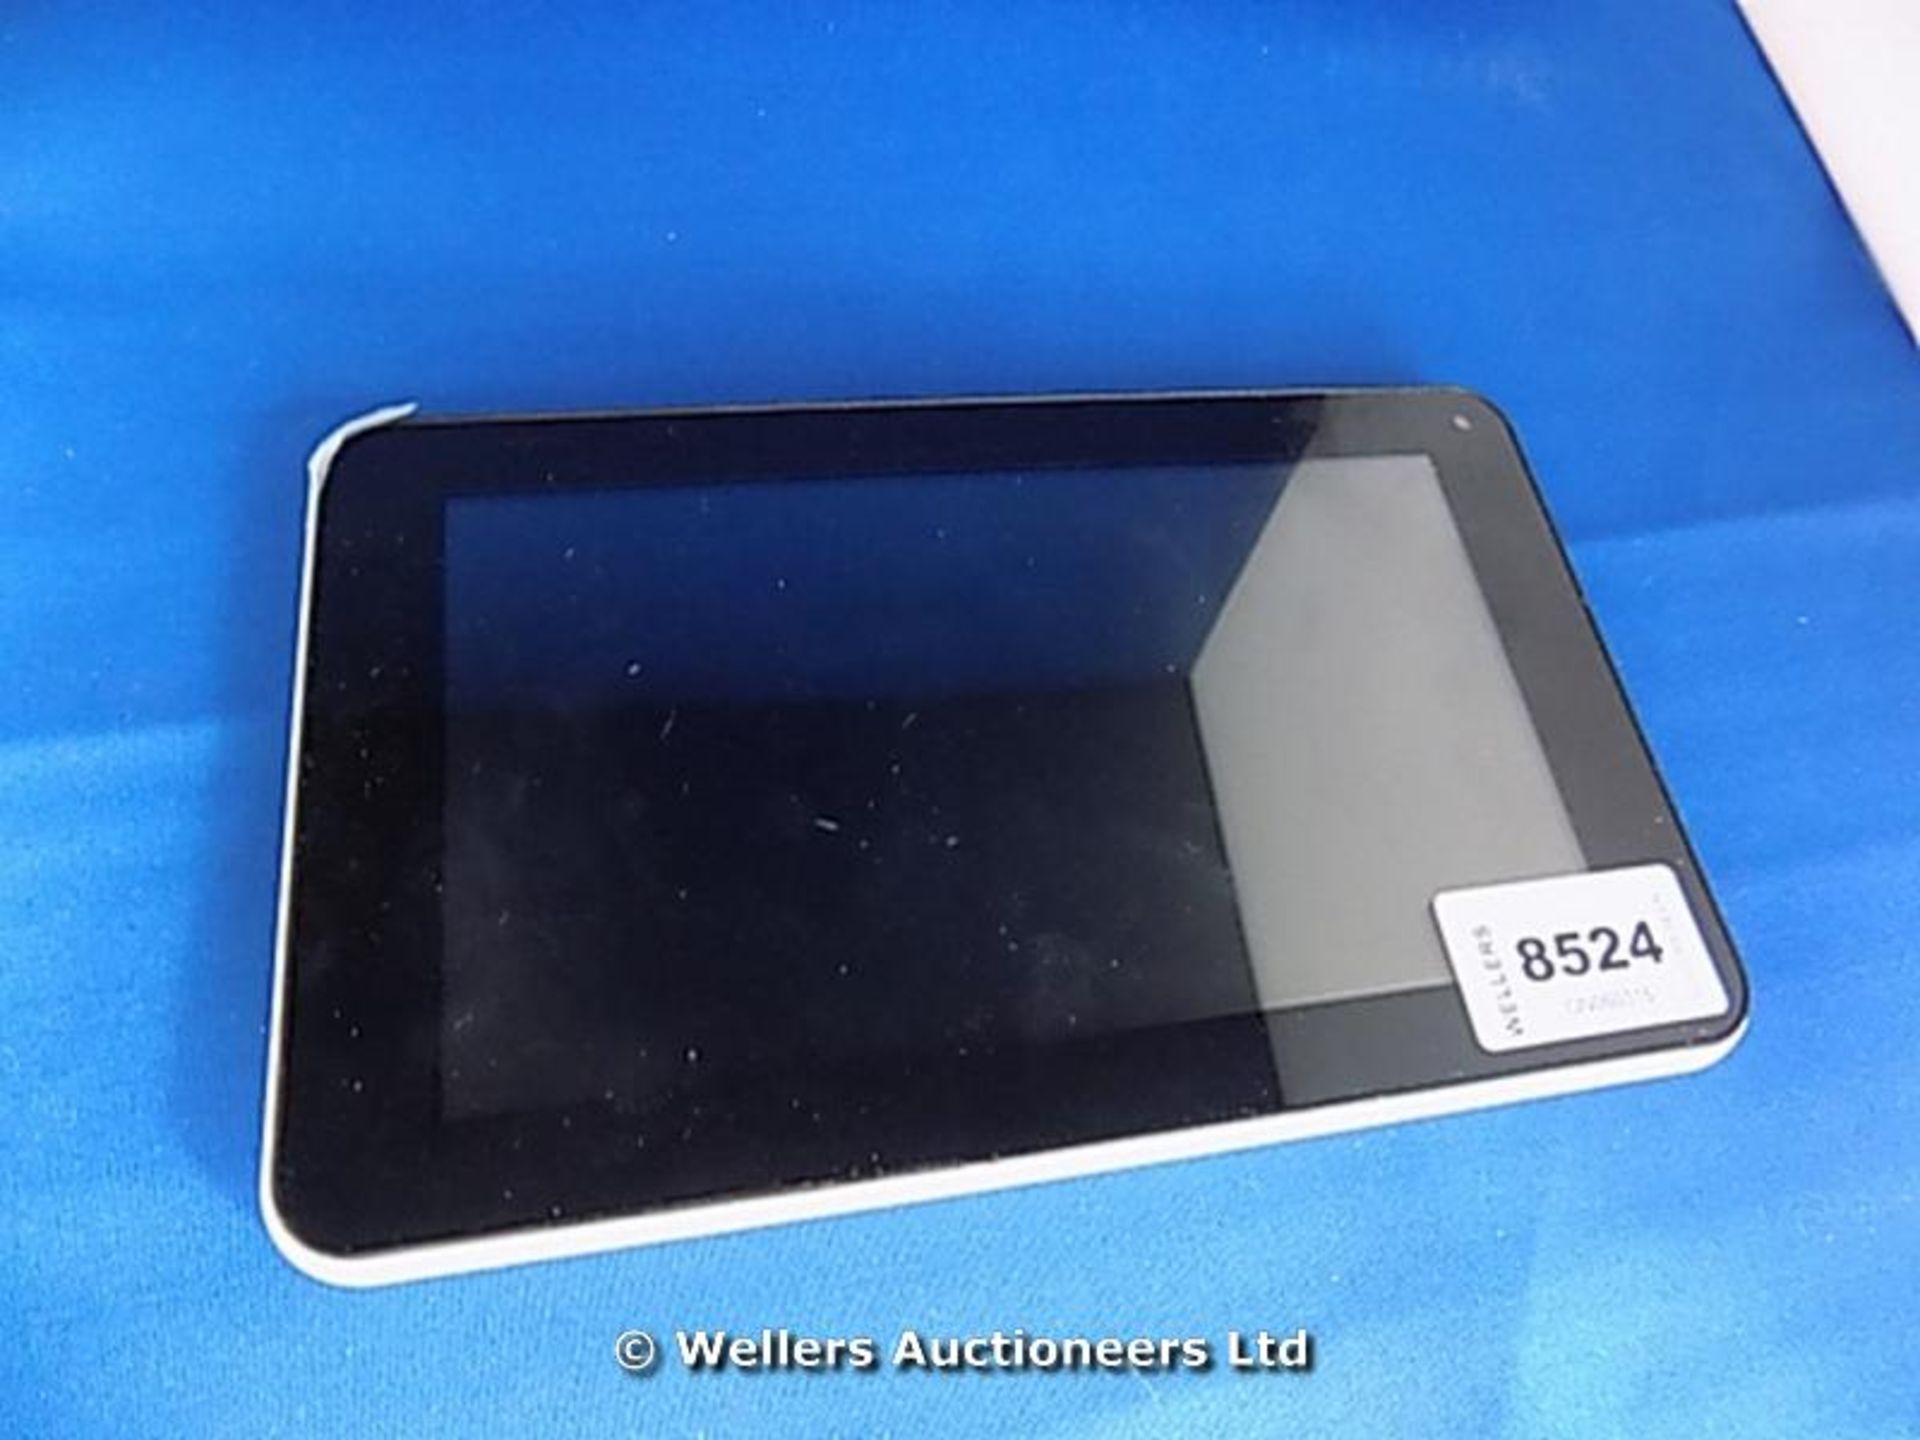 *KNC ANDROID DEVICE MODEL MID-708A,8GB STORAGE,ANDROID 4.1.1(WIPED AND RESTORED TO FACTORY DEFAULT